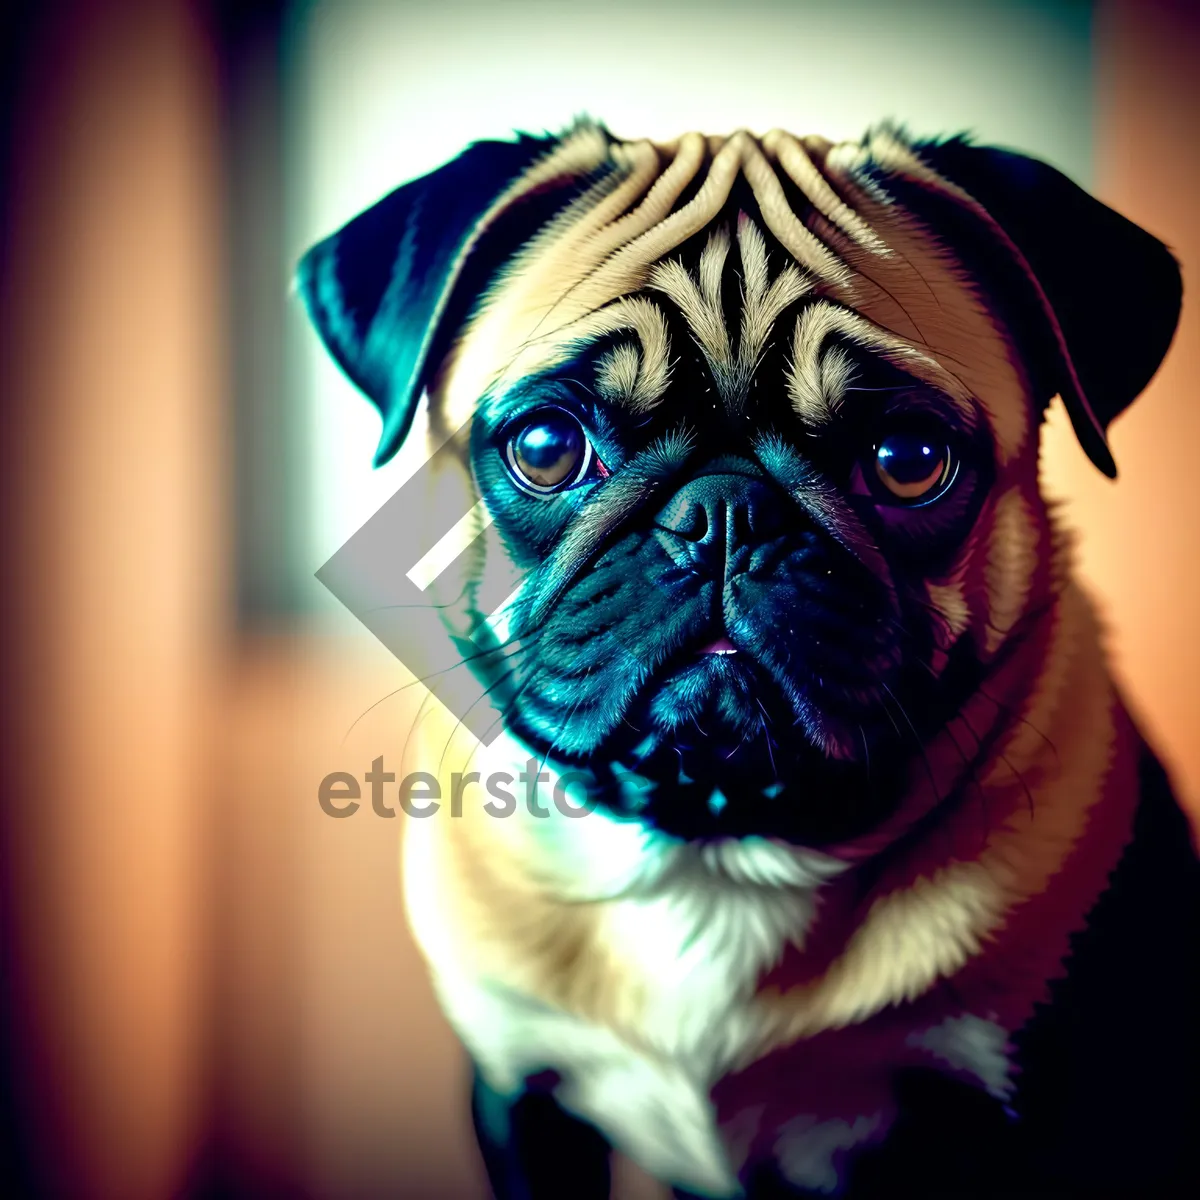 Picture of Cute Wrinkly Pug Dog Portrait